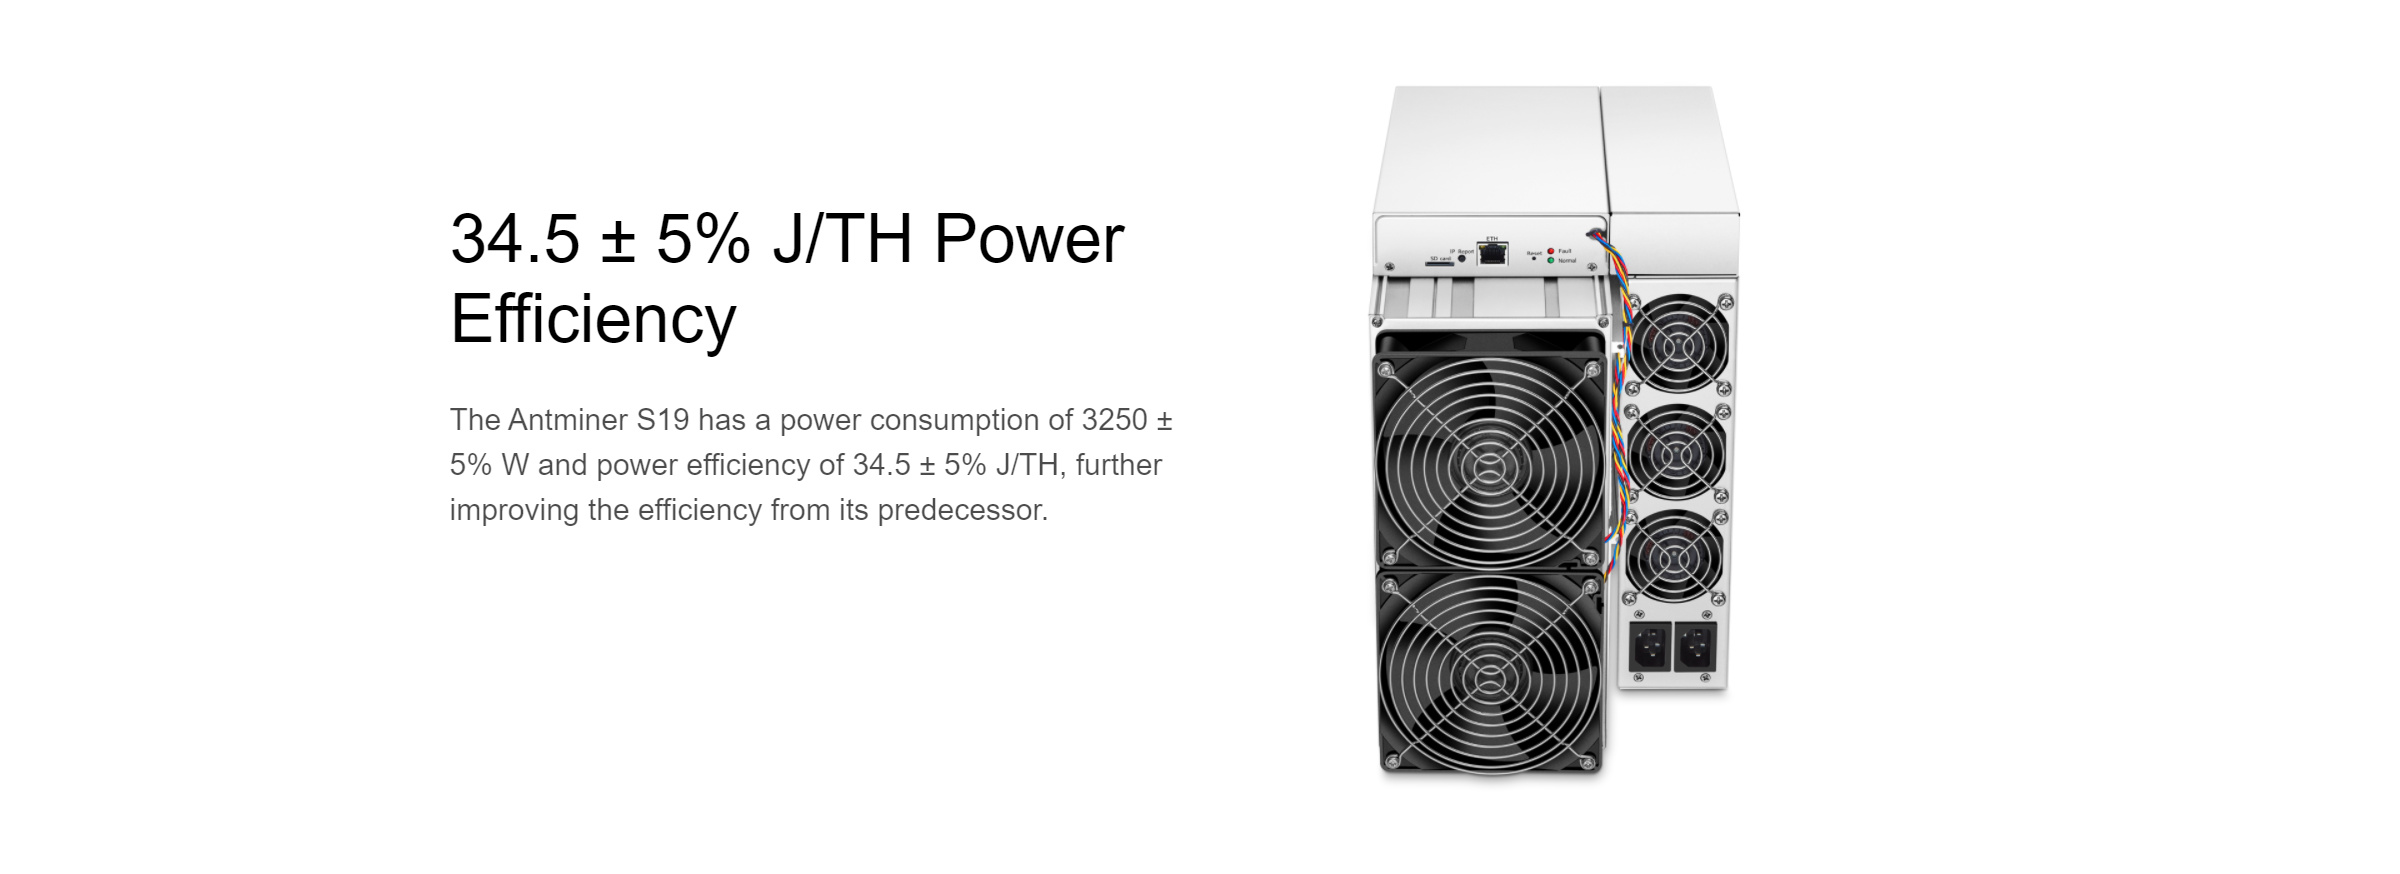 Antminer S19 95t 3250w New Asic Crypto With Apw12 Power Supply (6)